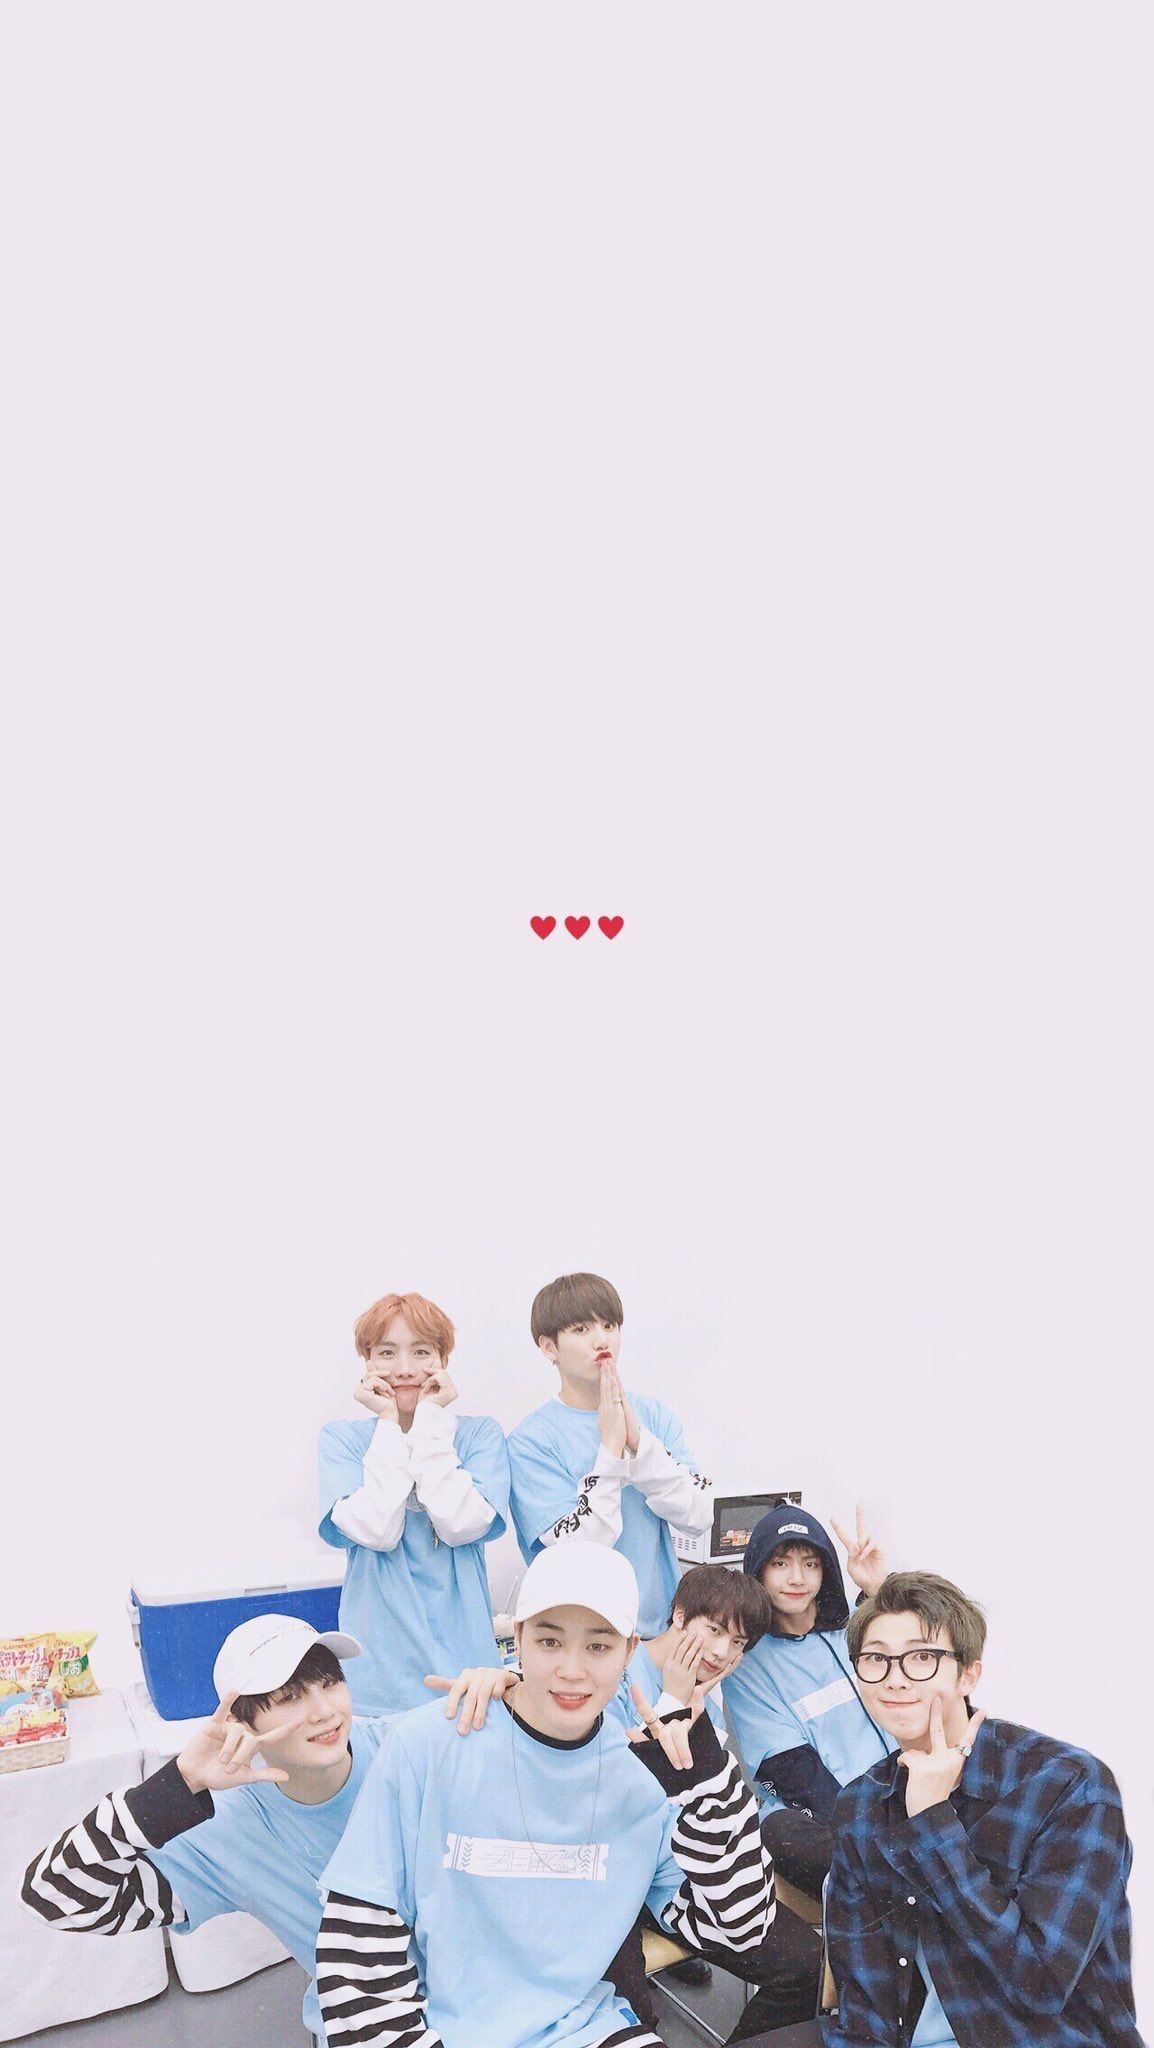 Aesthetic BTS HD Wallpapers - Wallpaper Cave